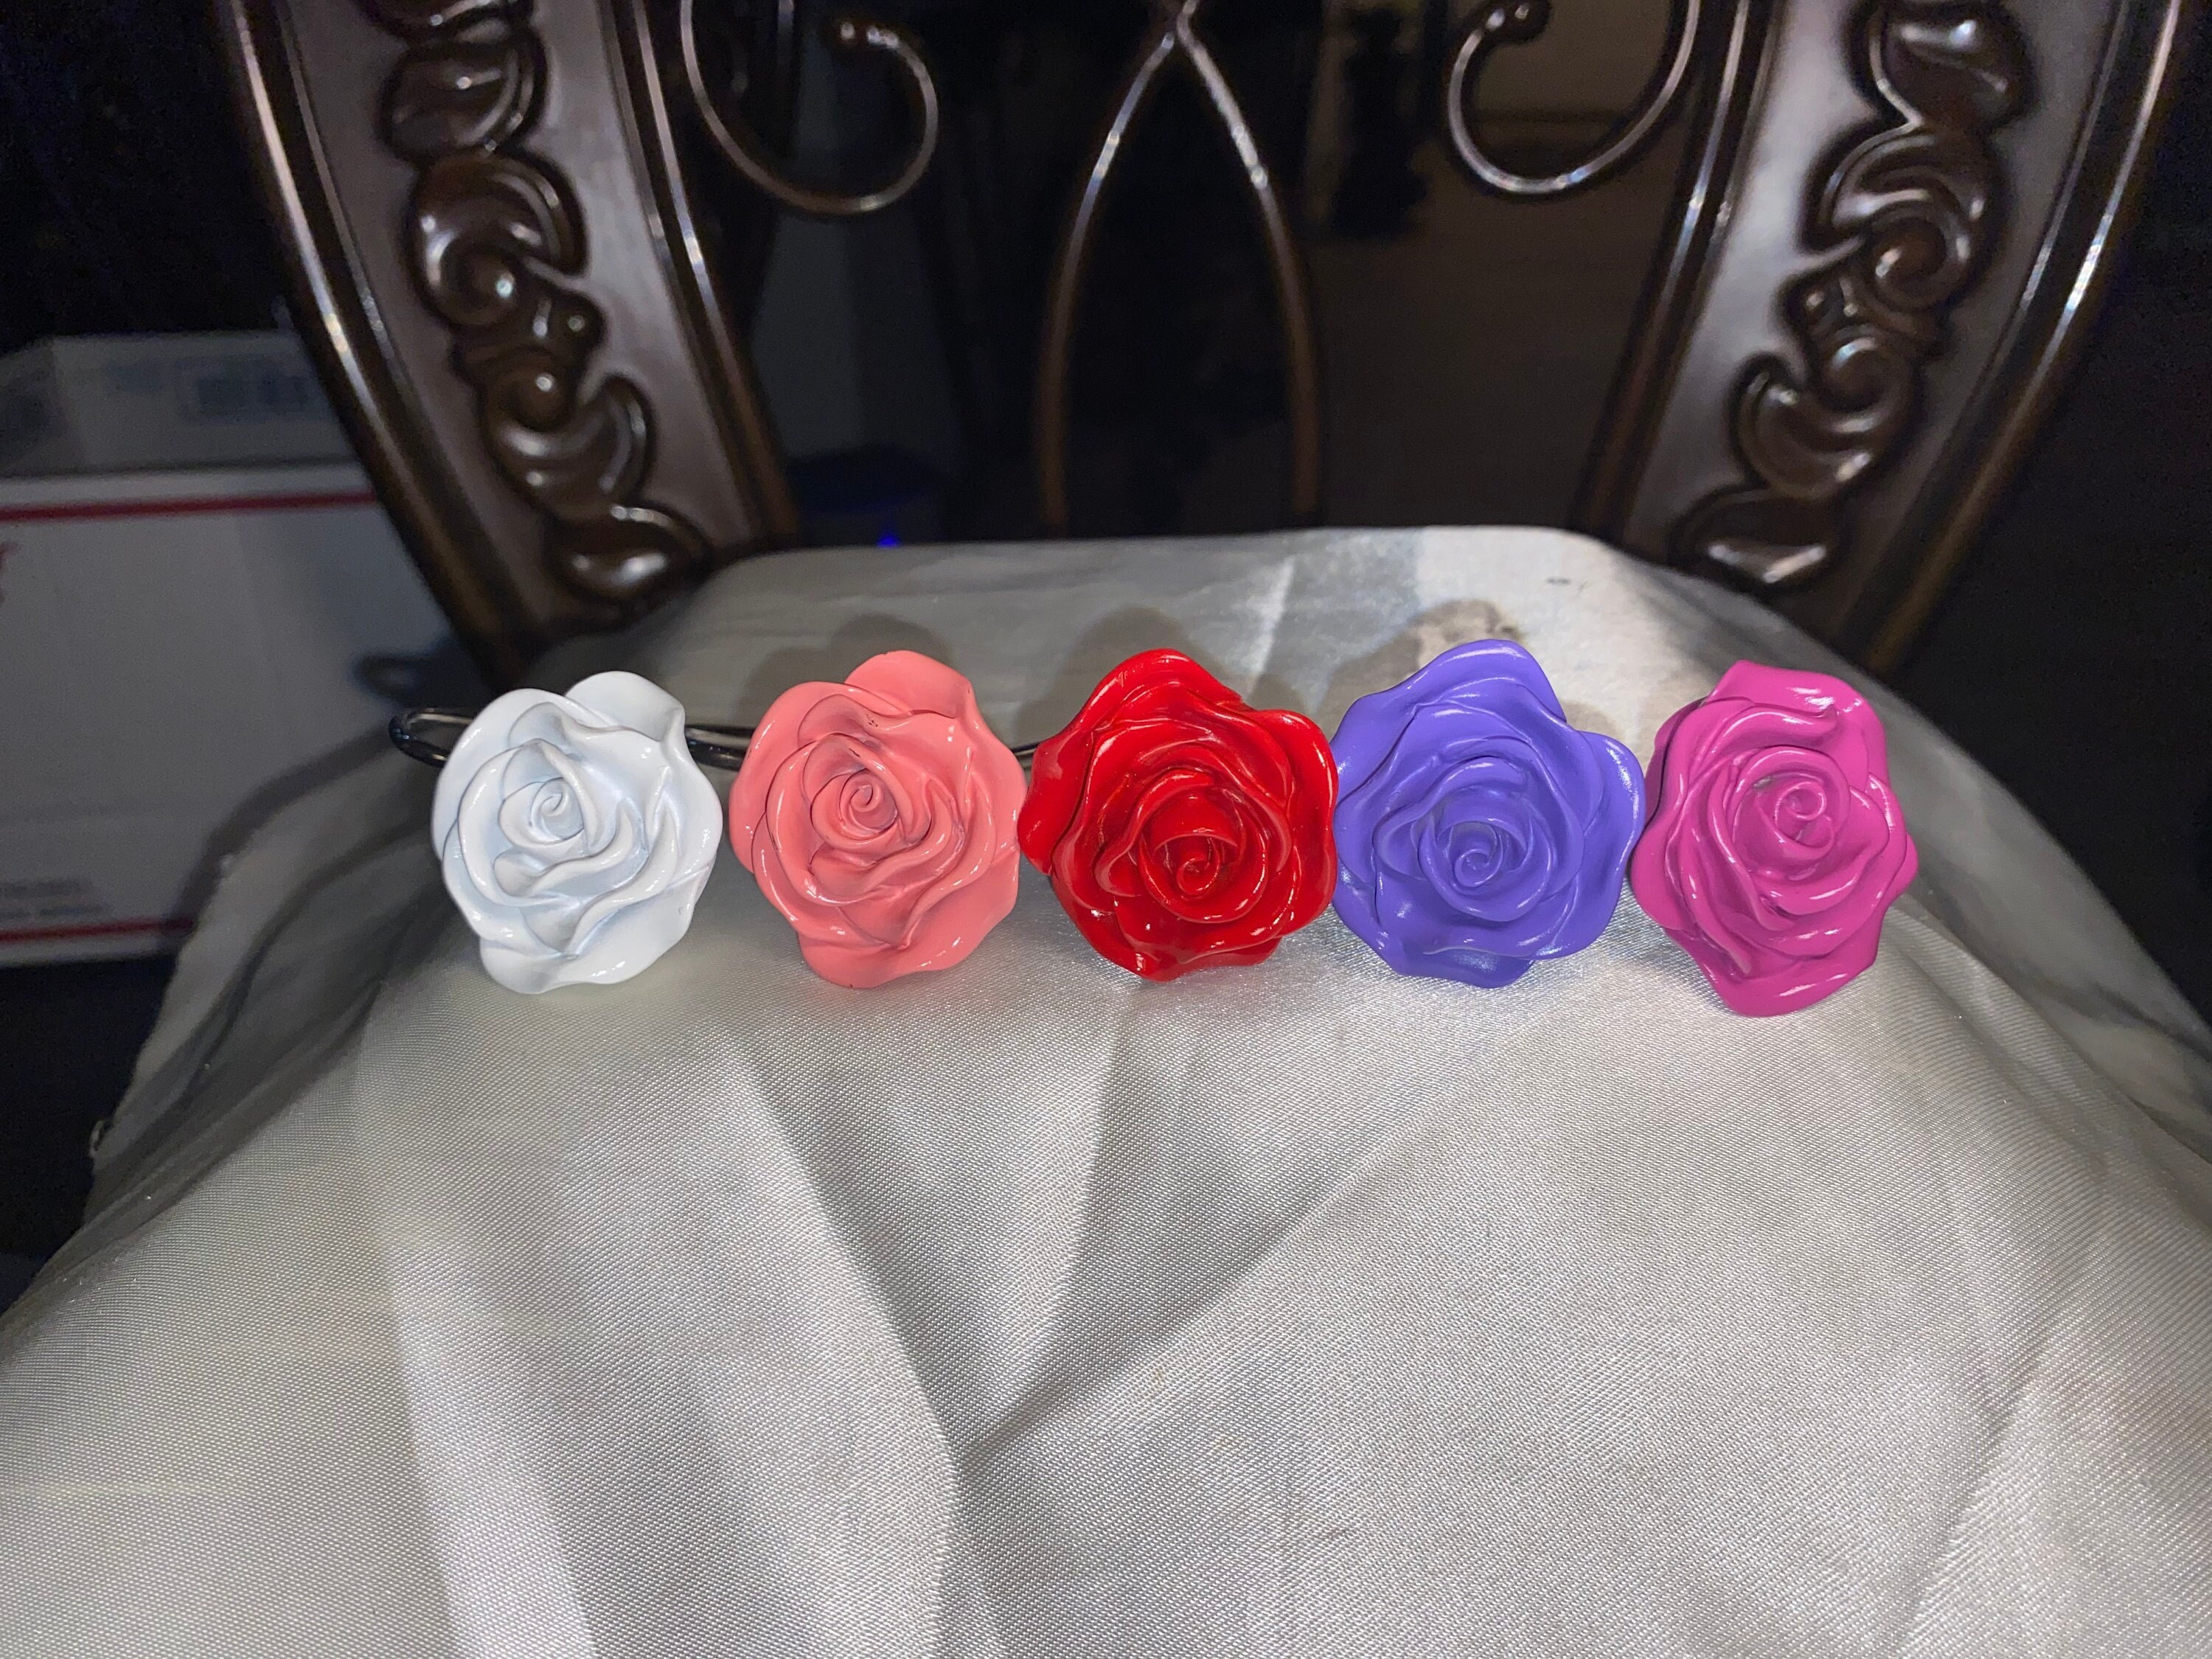 VINTAGE SET OF 12 Rose Shower Curtain Hooks Purple One's White One's Pink  One's Red Ones Fusia Ones You Pick Color. Bathroom Decor Roses 